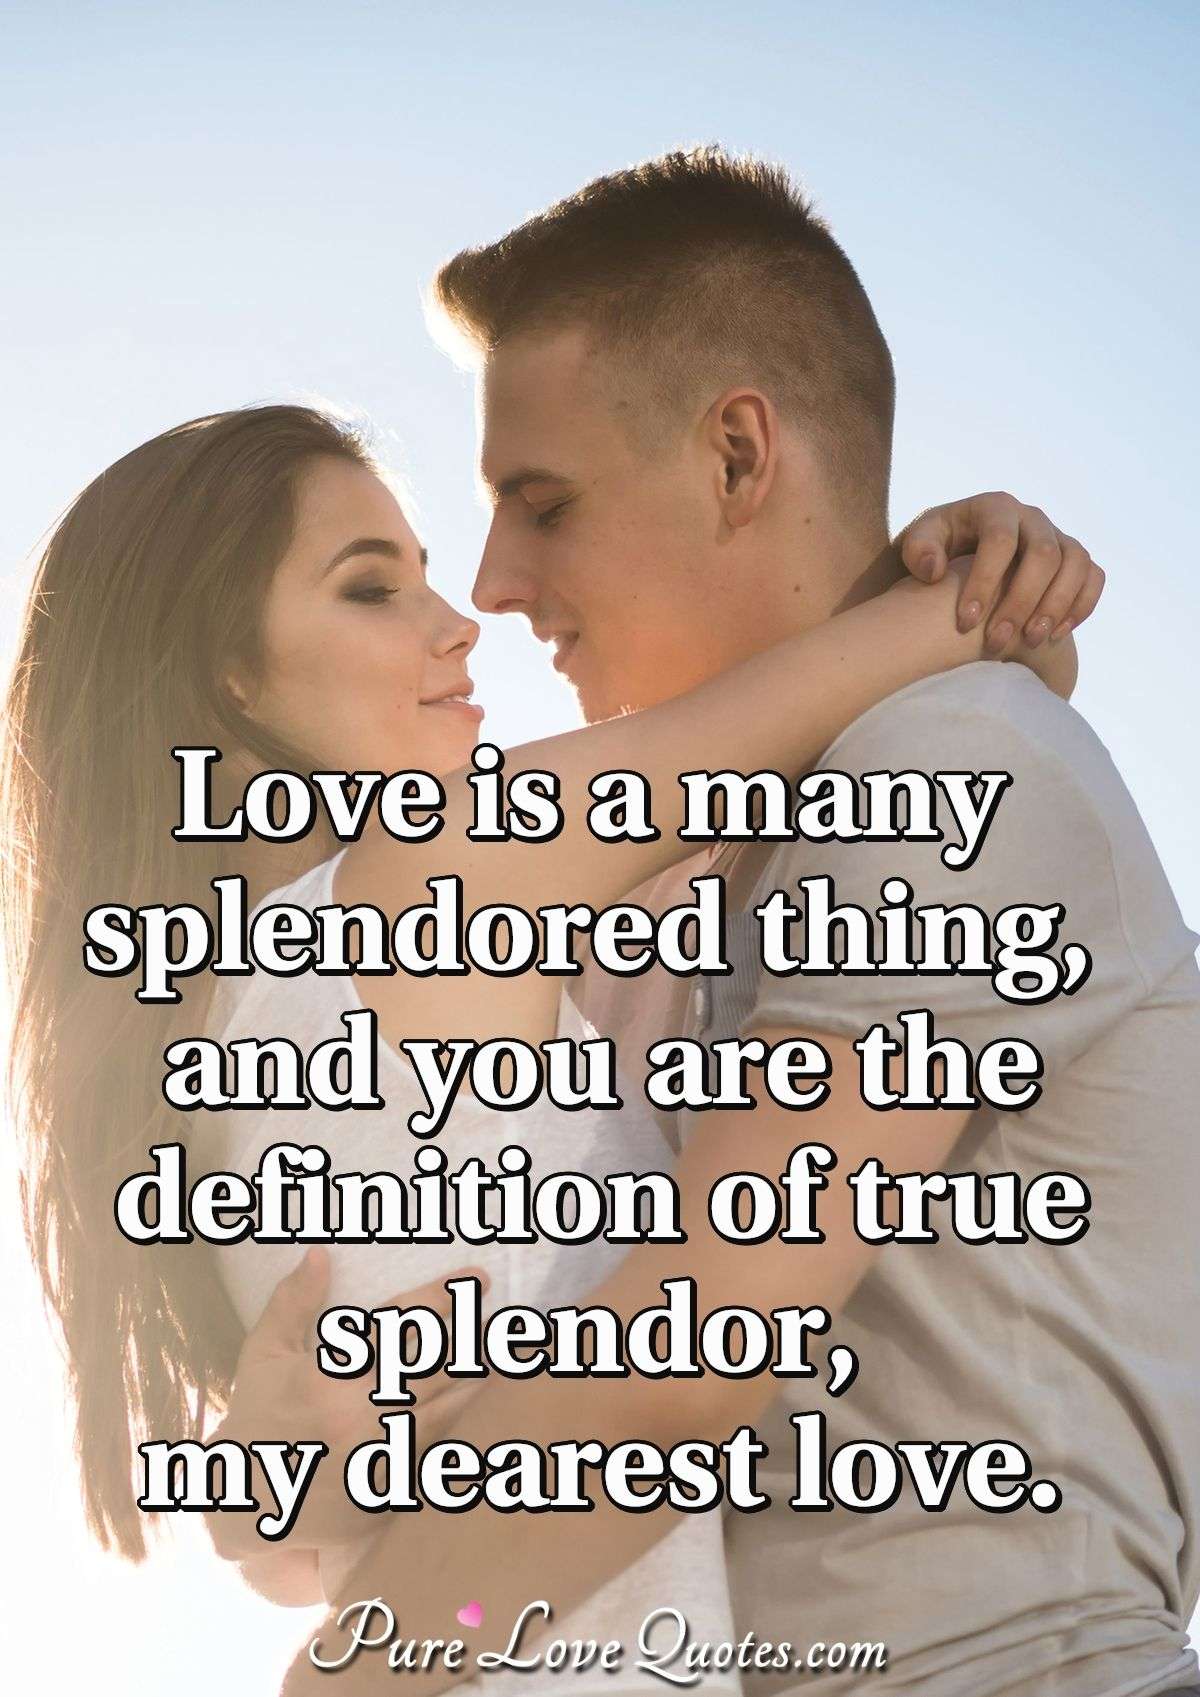 Love is a many splendored thing, and you are the definition of true splendor, my dearest love. - Anonymous